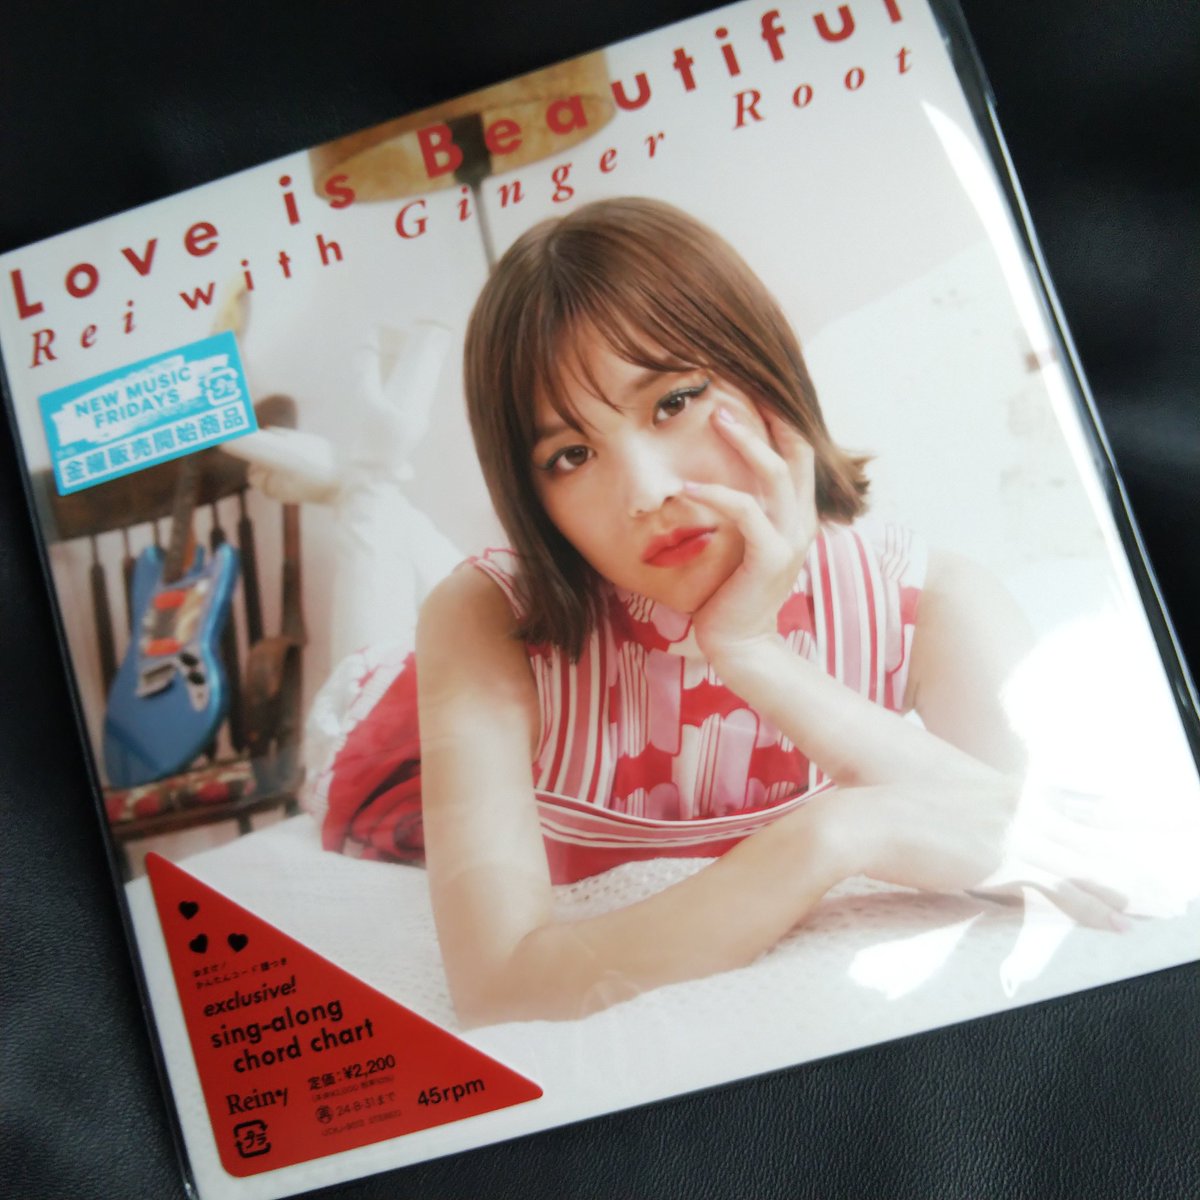 Love is Beautiful with Ginger Rootの7inchアナログ盤、お出迎え🧿
でも今から Rei Release Tour 'VOICE MESSAGE' 東京公演へ向かうので聴けないのが残念🙏
#VOICERei #Rei
#GingerRoot #ジンジャールート
@guita_rei